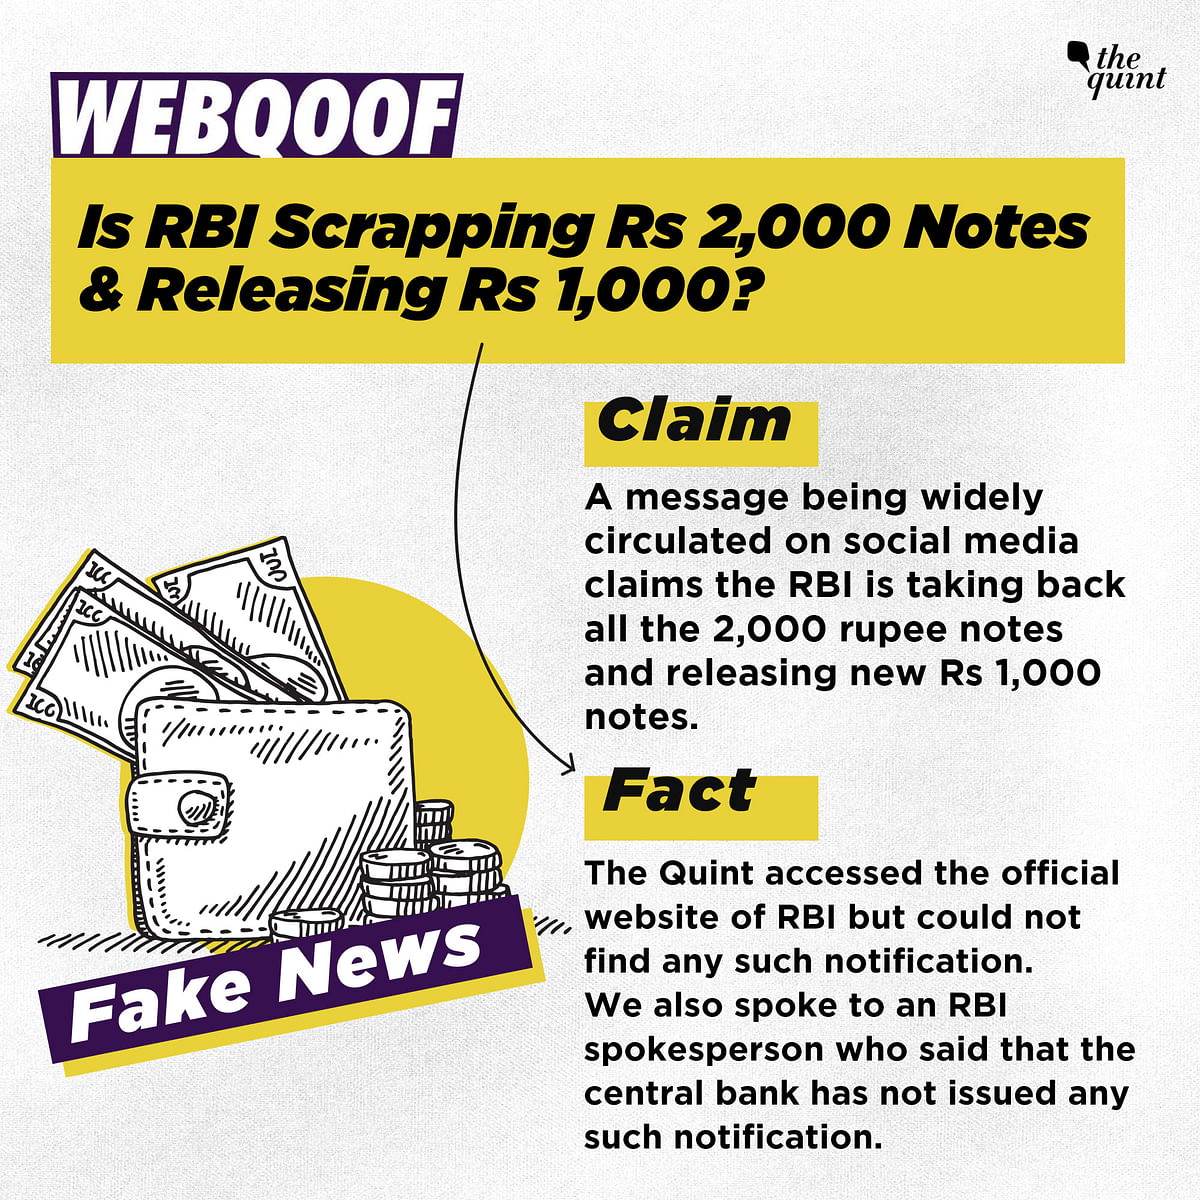 The Quint could verify that the message is a hoax and the central bank has no such plans.